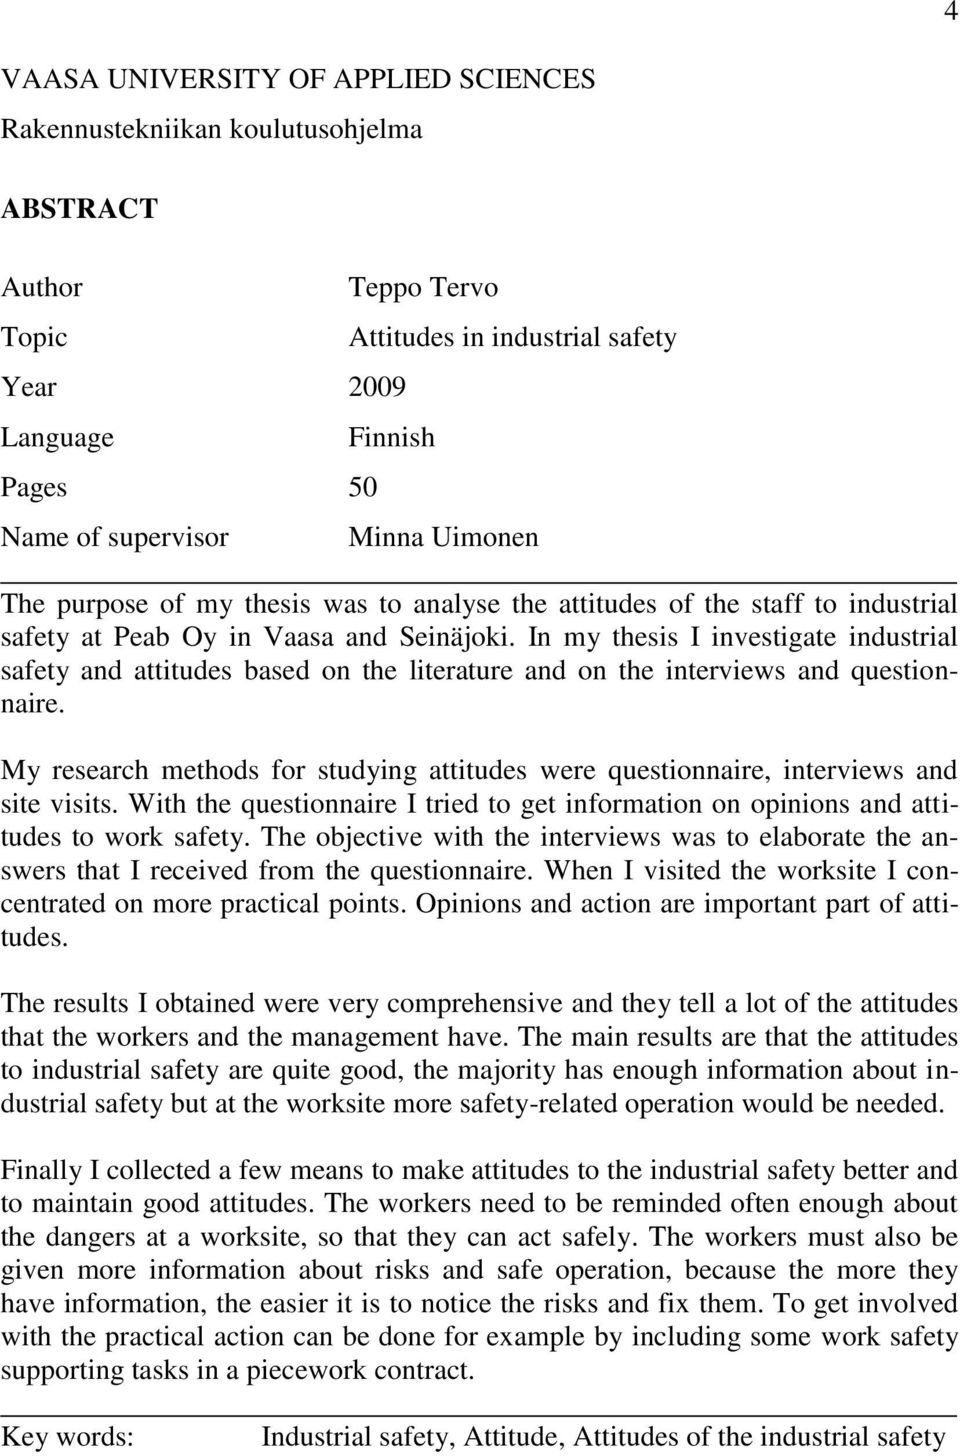 In my thesis I investigate industrial safety and attitudes based on the literature and on the interviews and questionnaire.